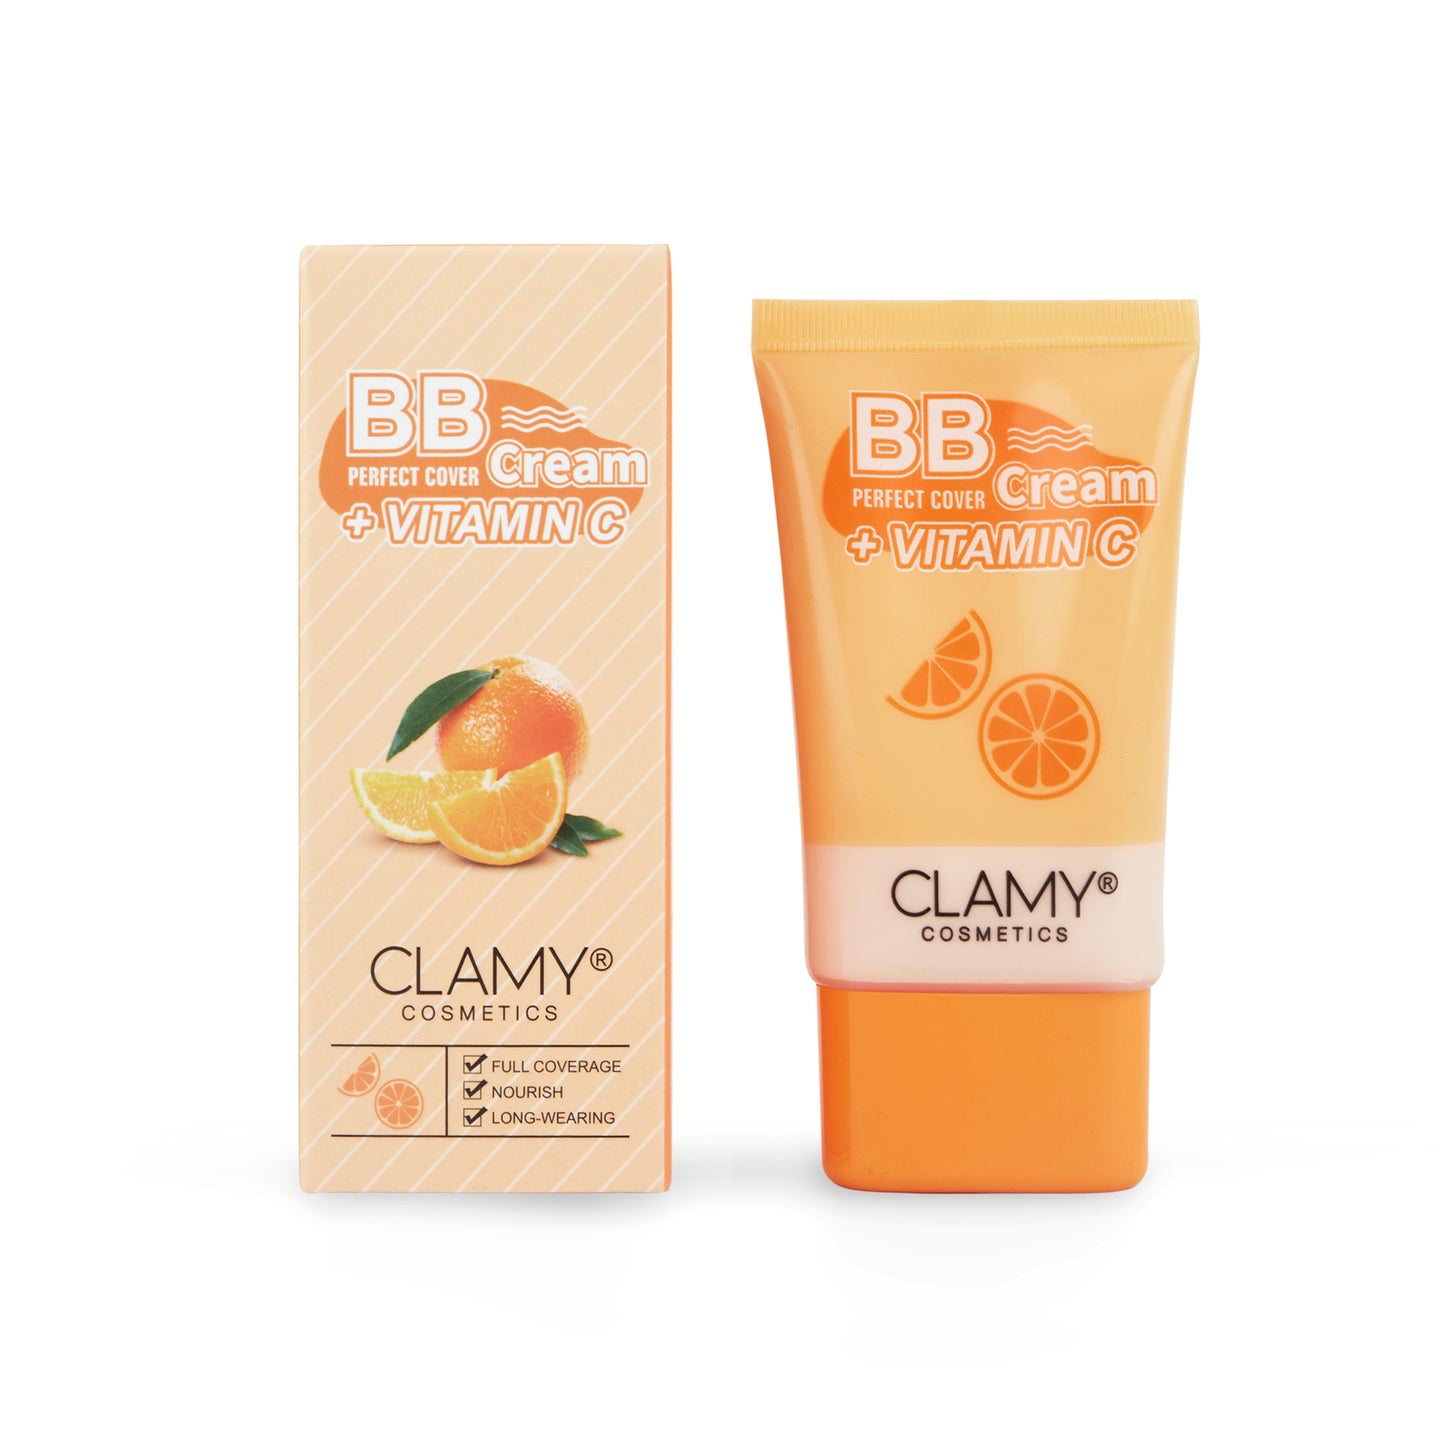 Clamy BB Cream Vitamin C Perfect Cover Foundation, Smooth Creamy Texture, Flawless Makeup Look 50g